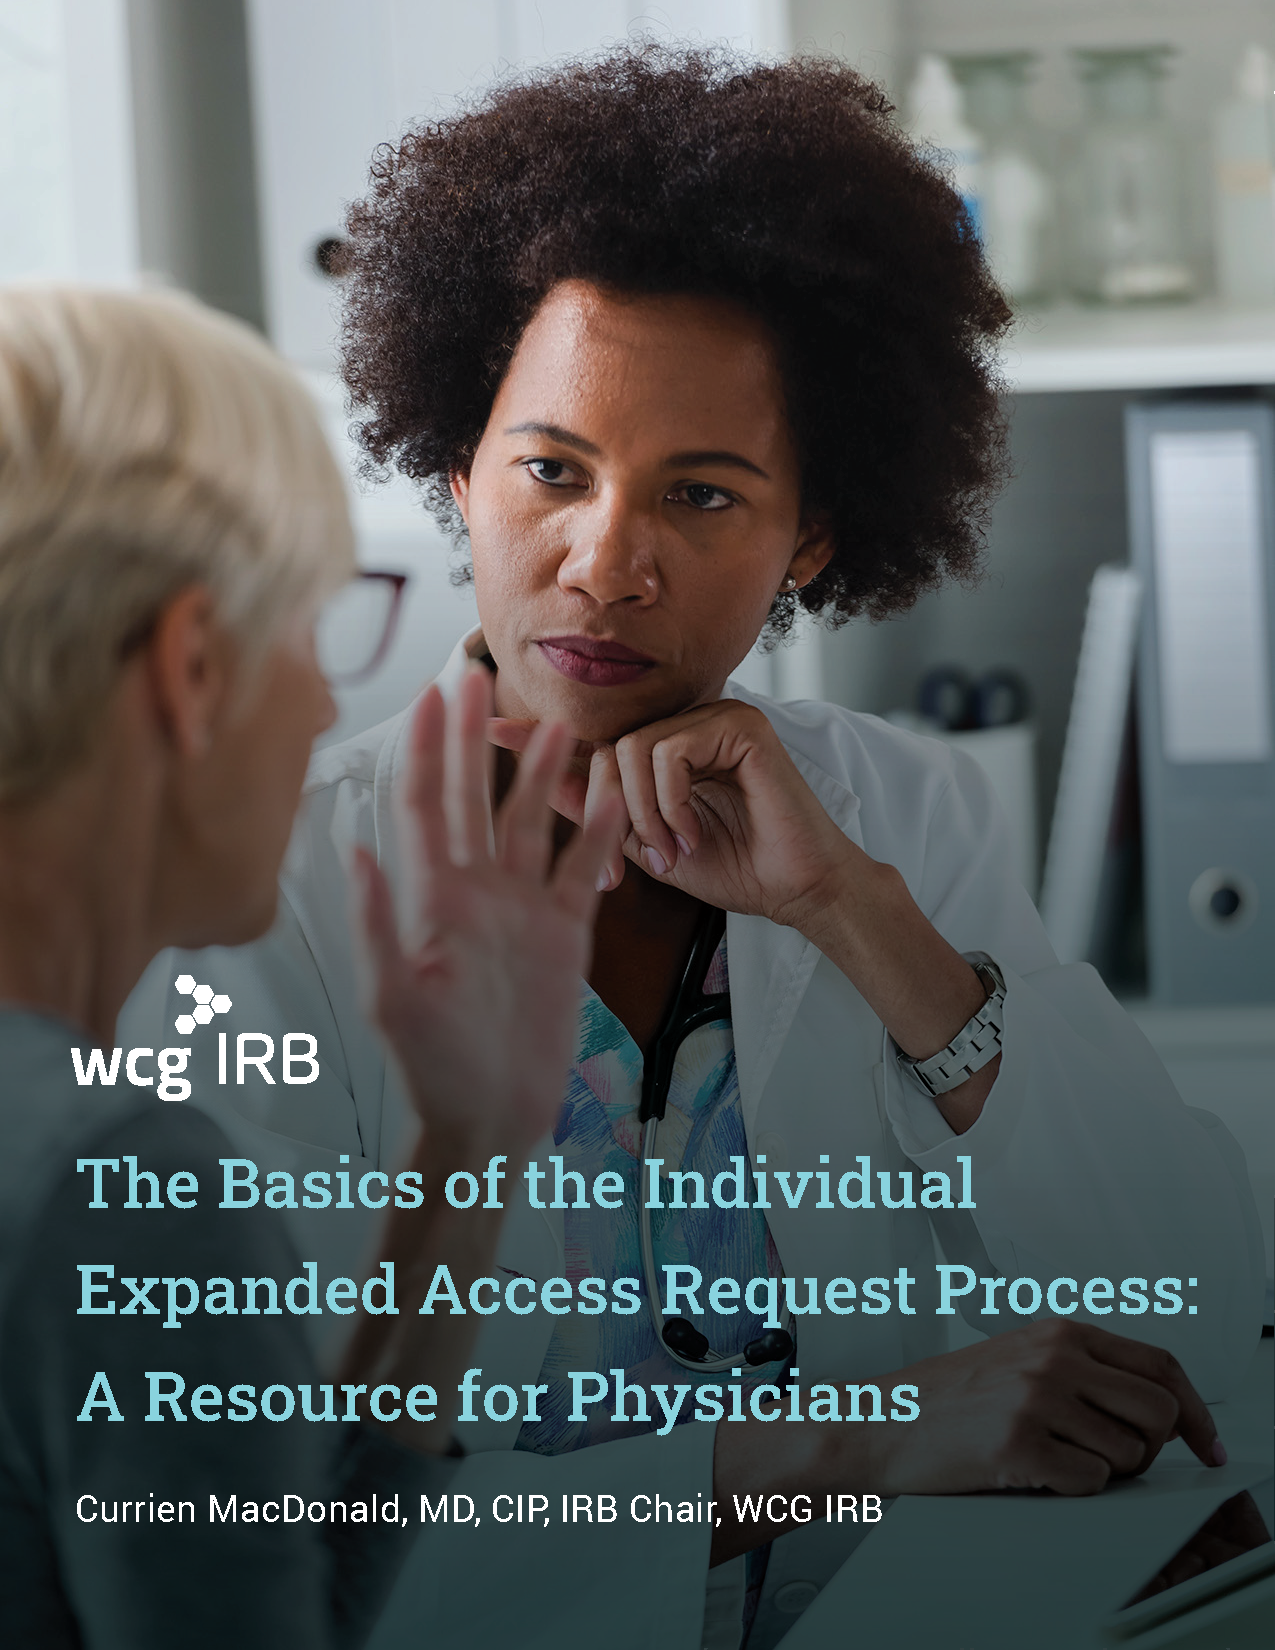 The Basics of the Individual Expanded Access Request Process: A Resource for Physicians